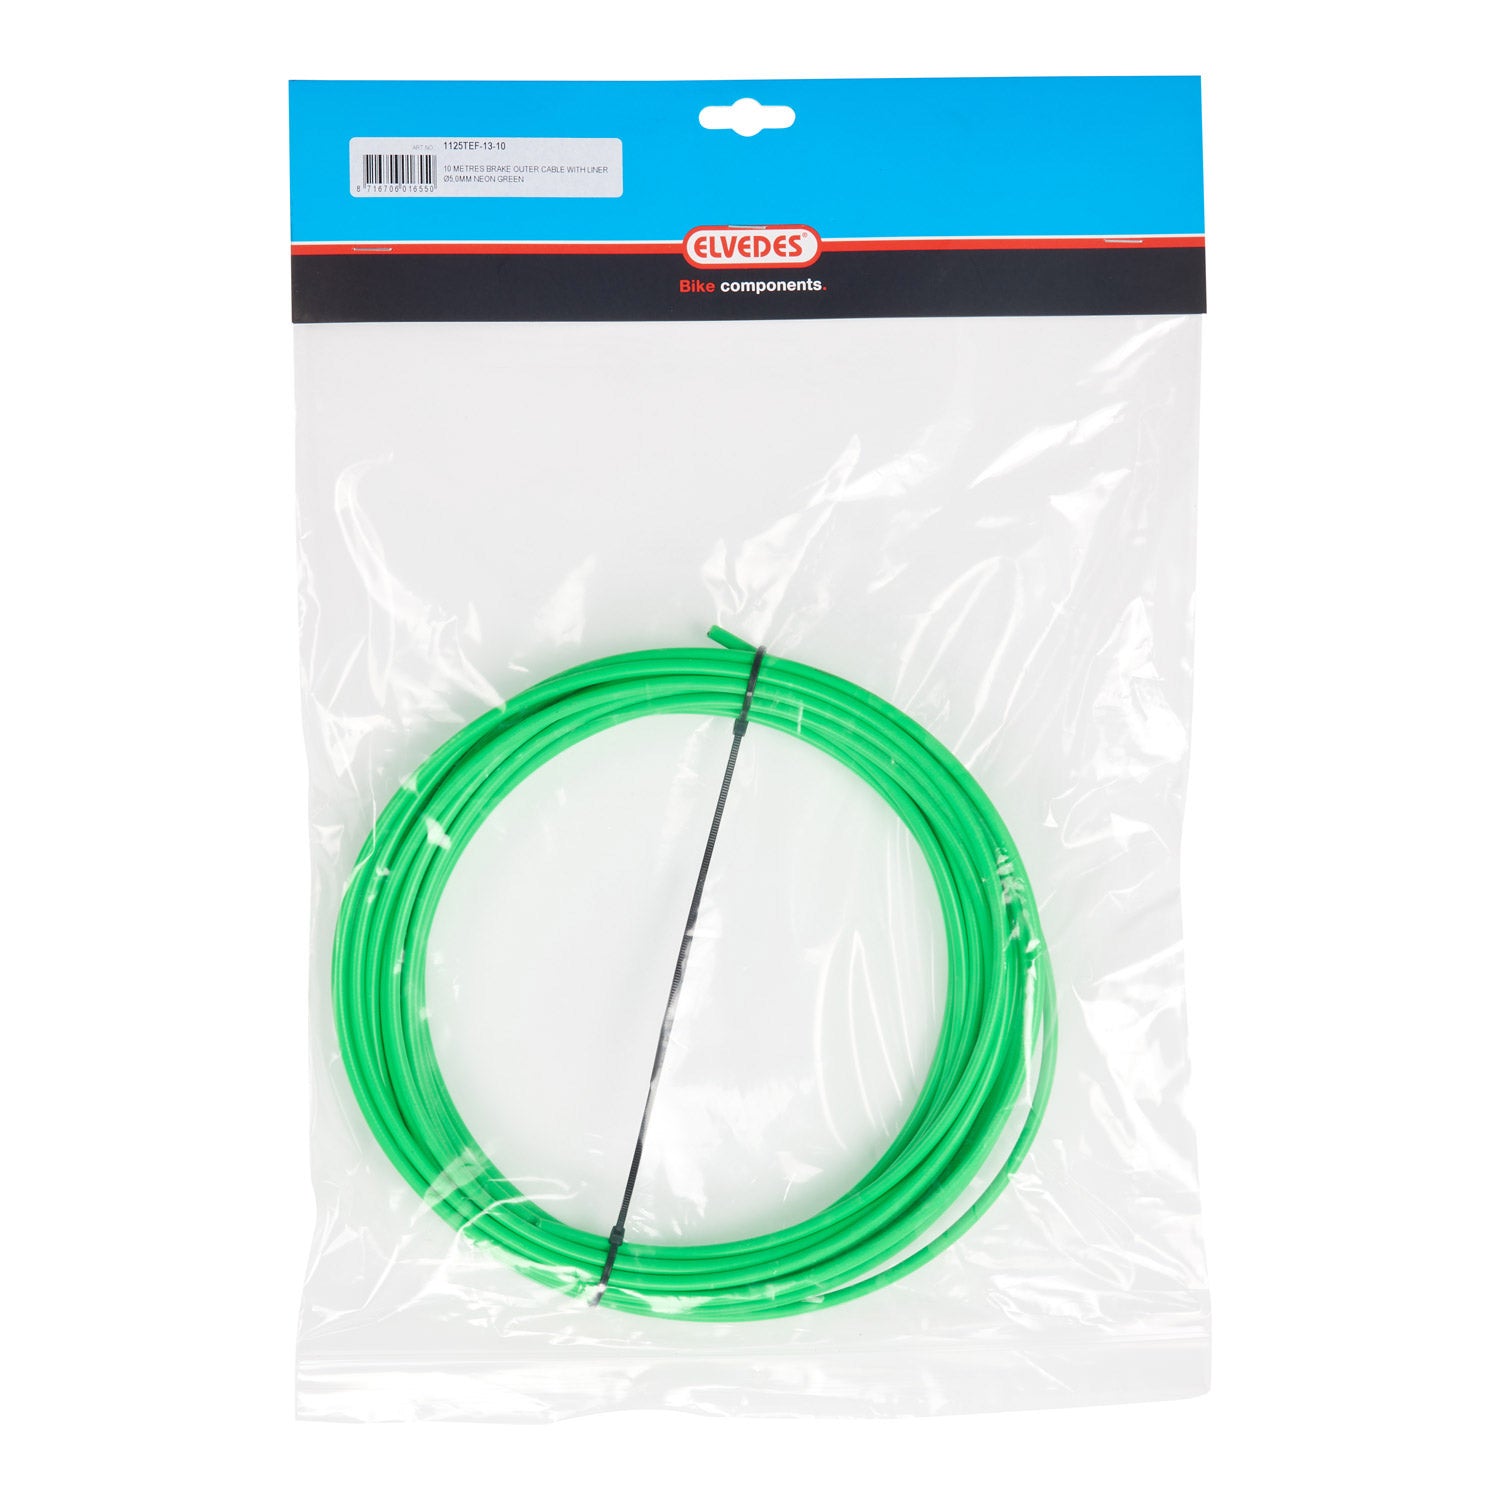 Elvedes outer cable brake 5mm neon green with teflon 10m 1125tef-13